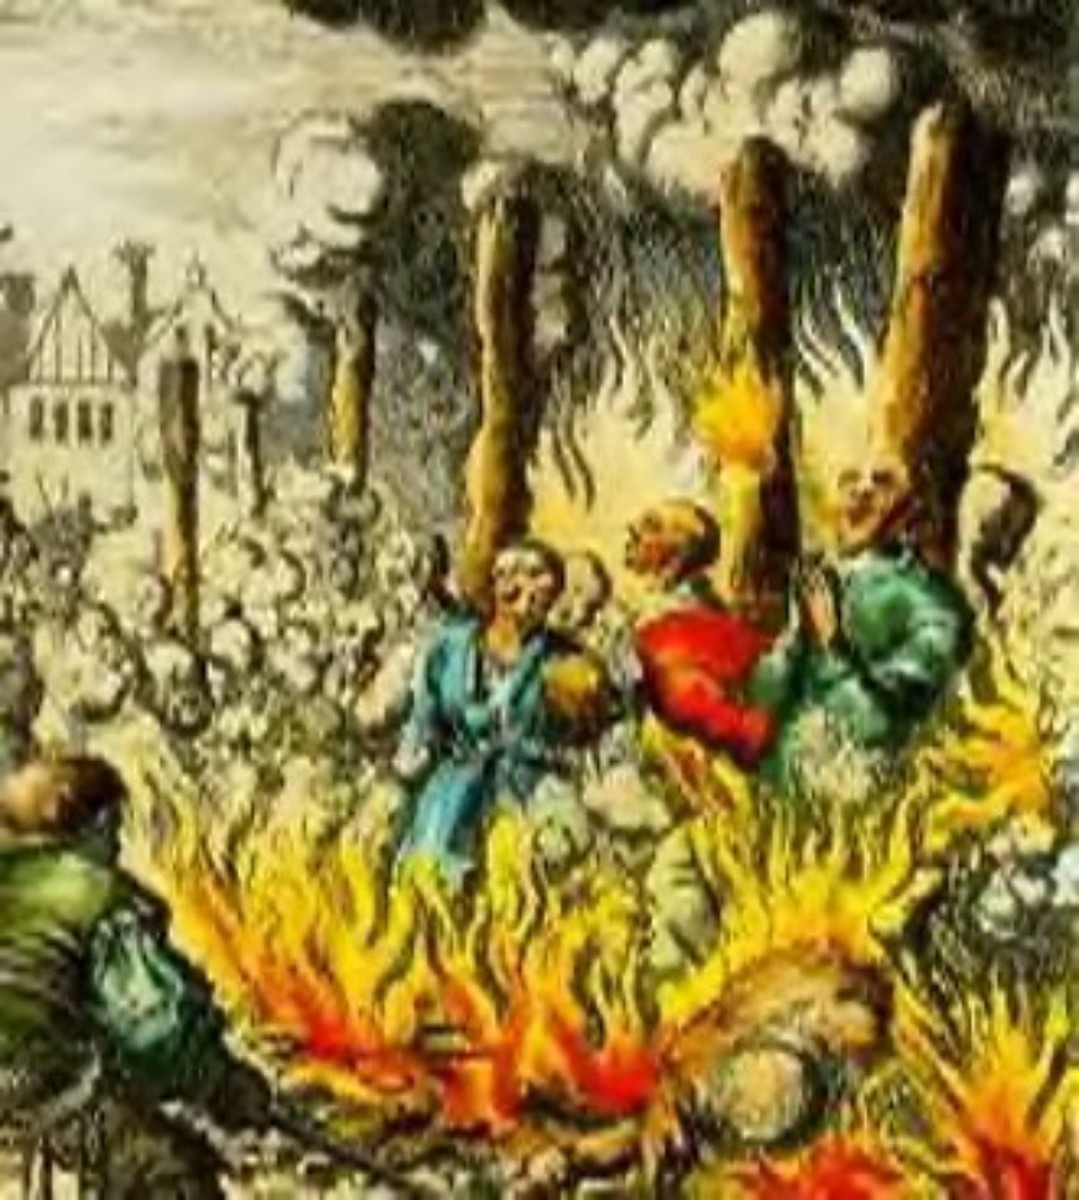 In fires like this, hetero men and women, lesbians and gay-queer men were burned alive for witchcraft, and, additionally, gay-queer men for same-sex loving.